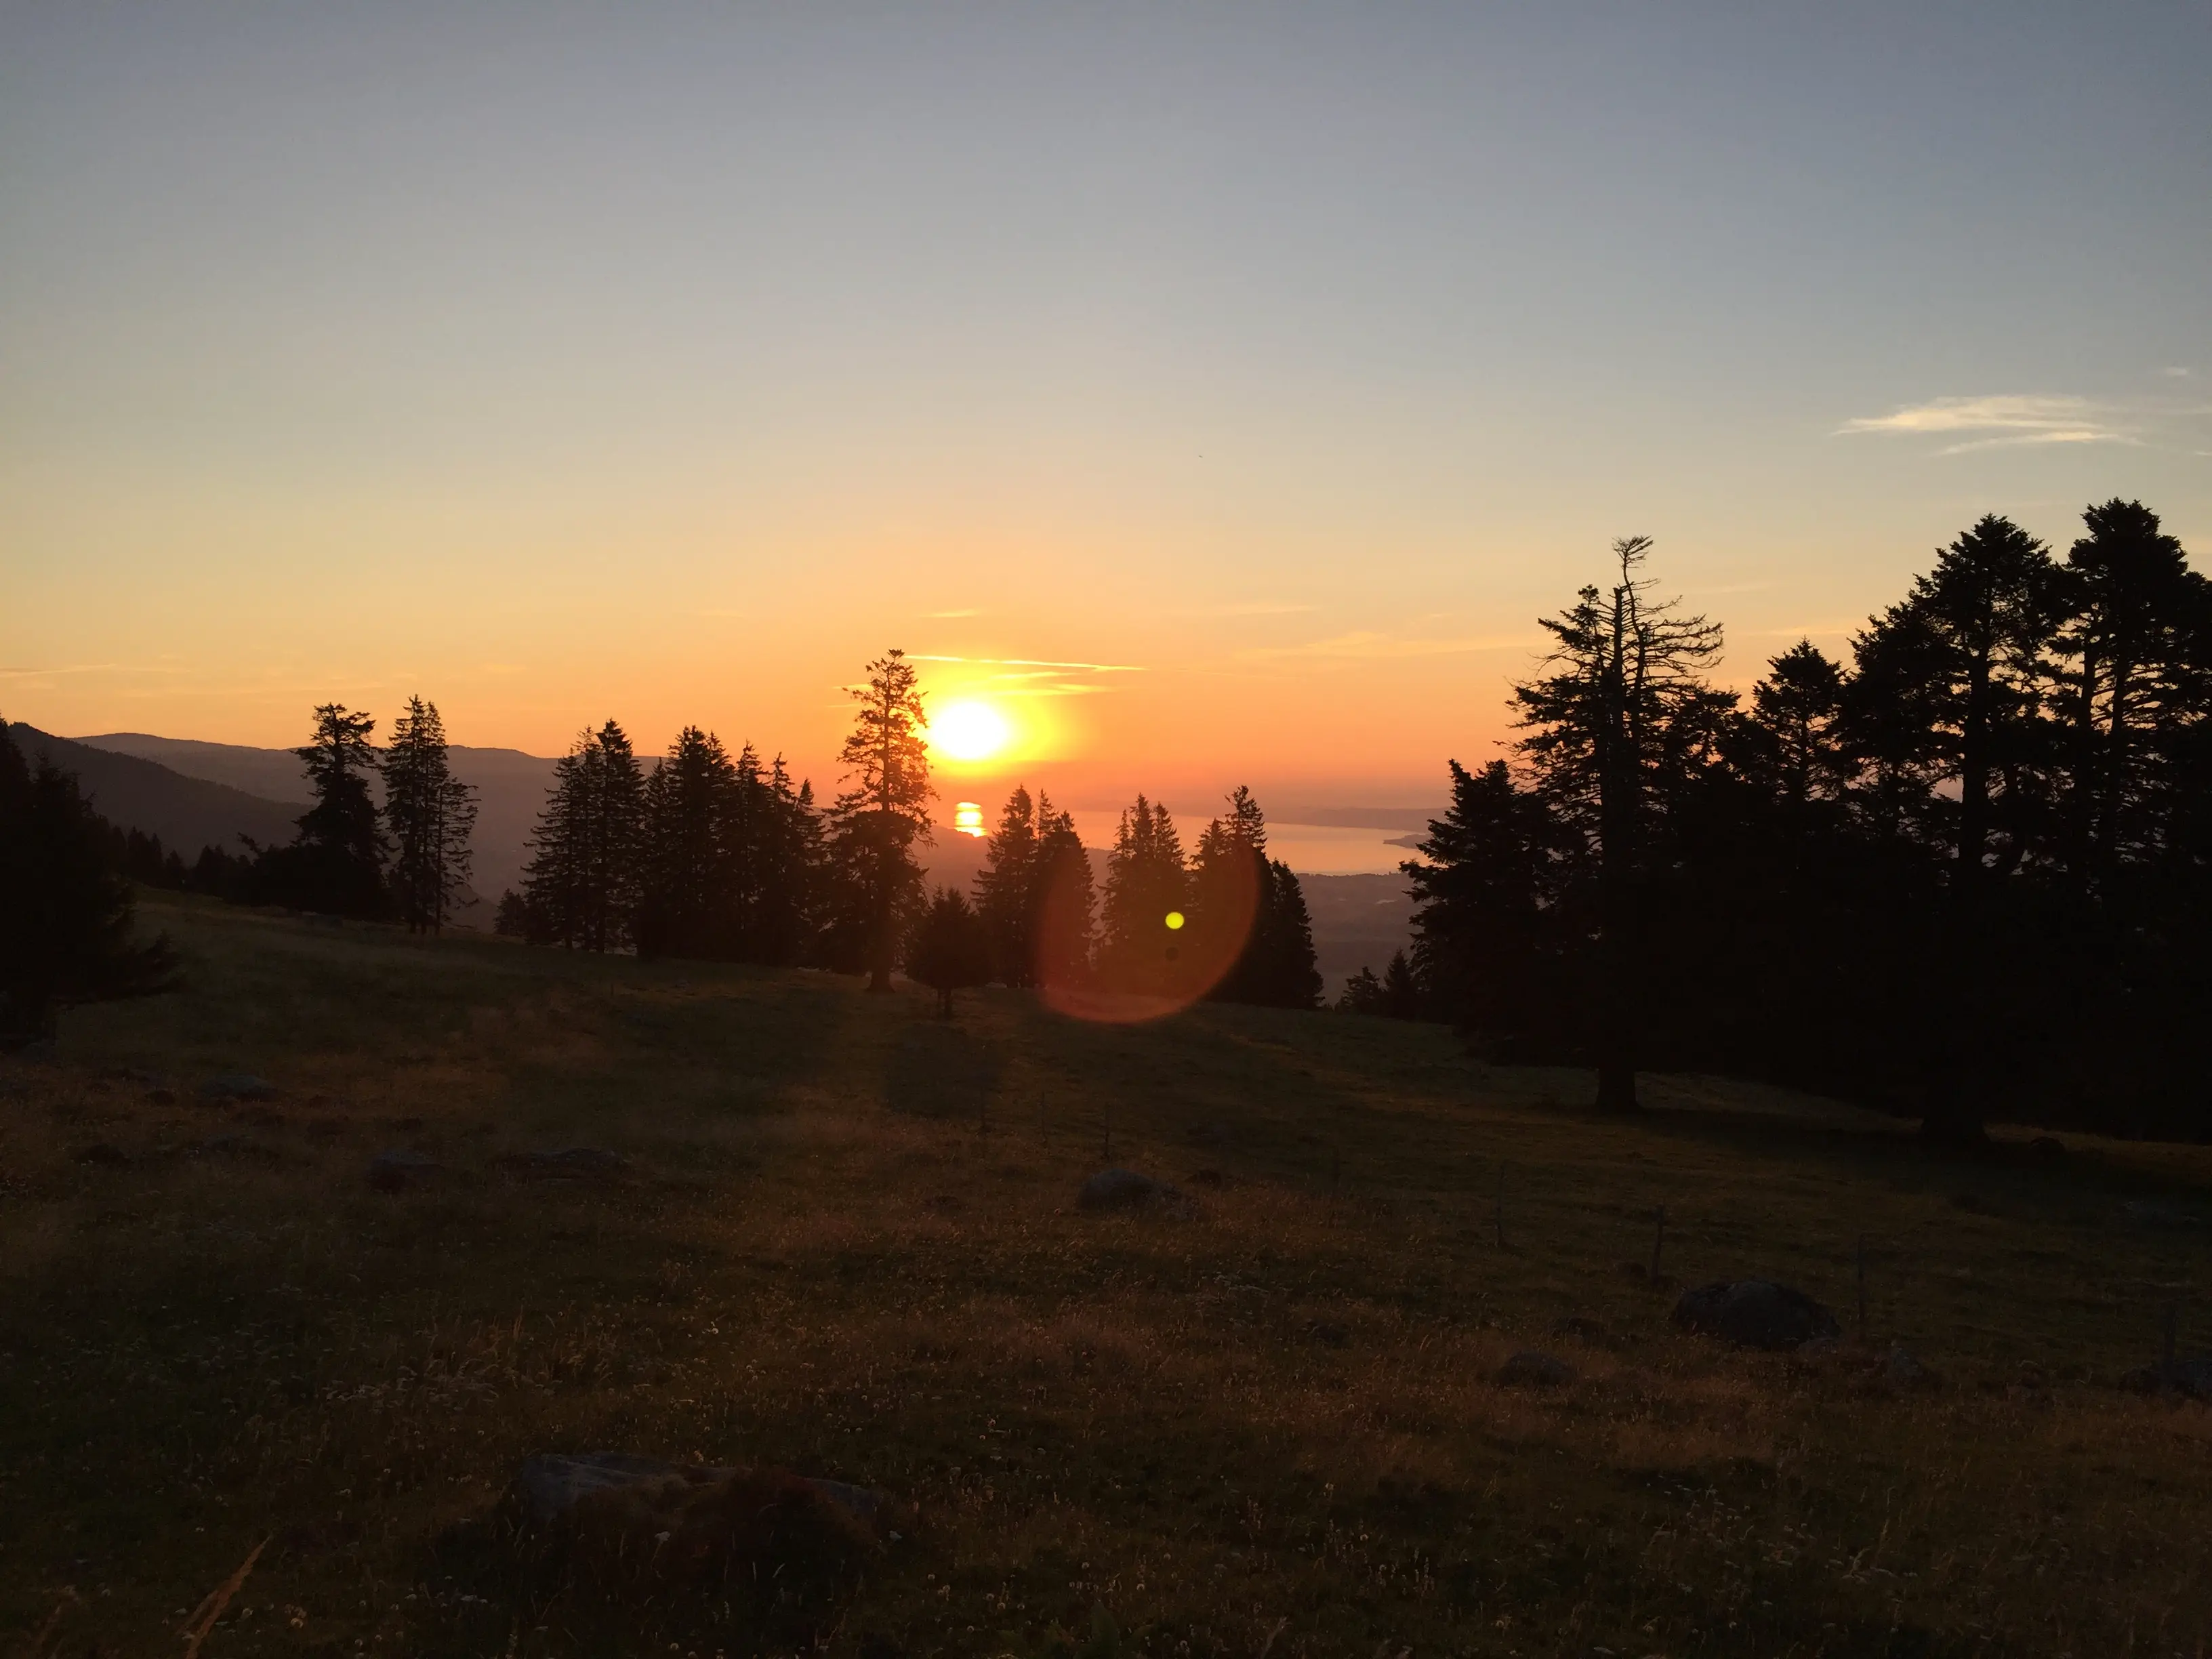 I went up in the Swiss Jura mountains this summer, at 5am, to enjoy this gorgeous view...